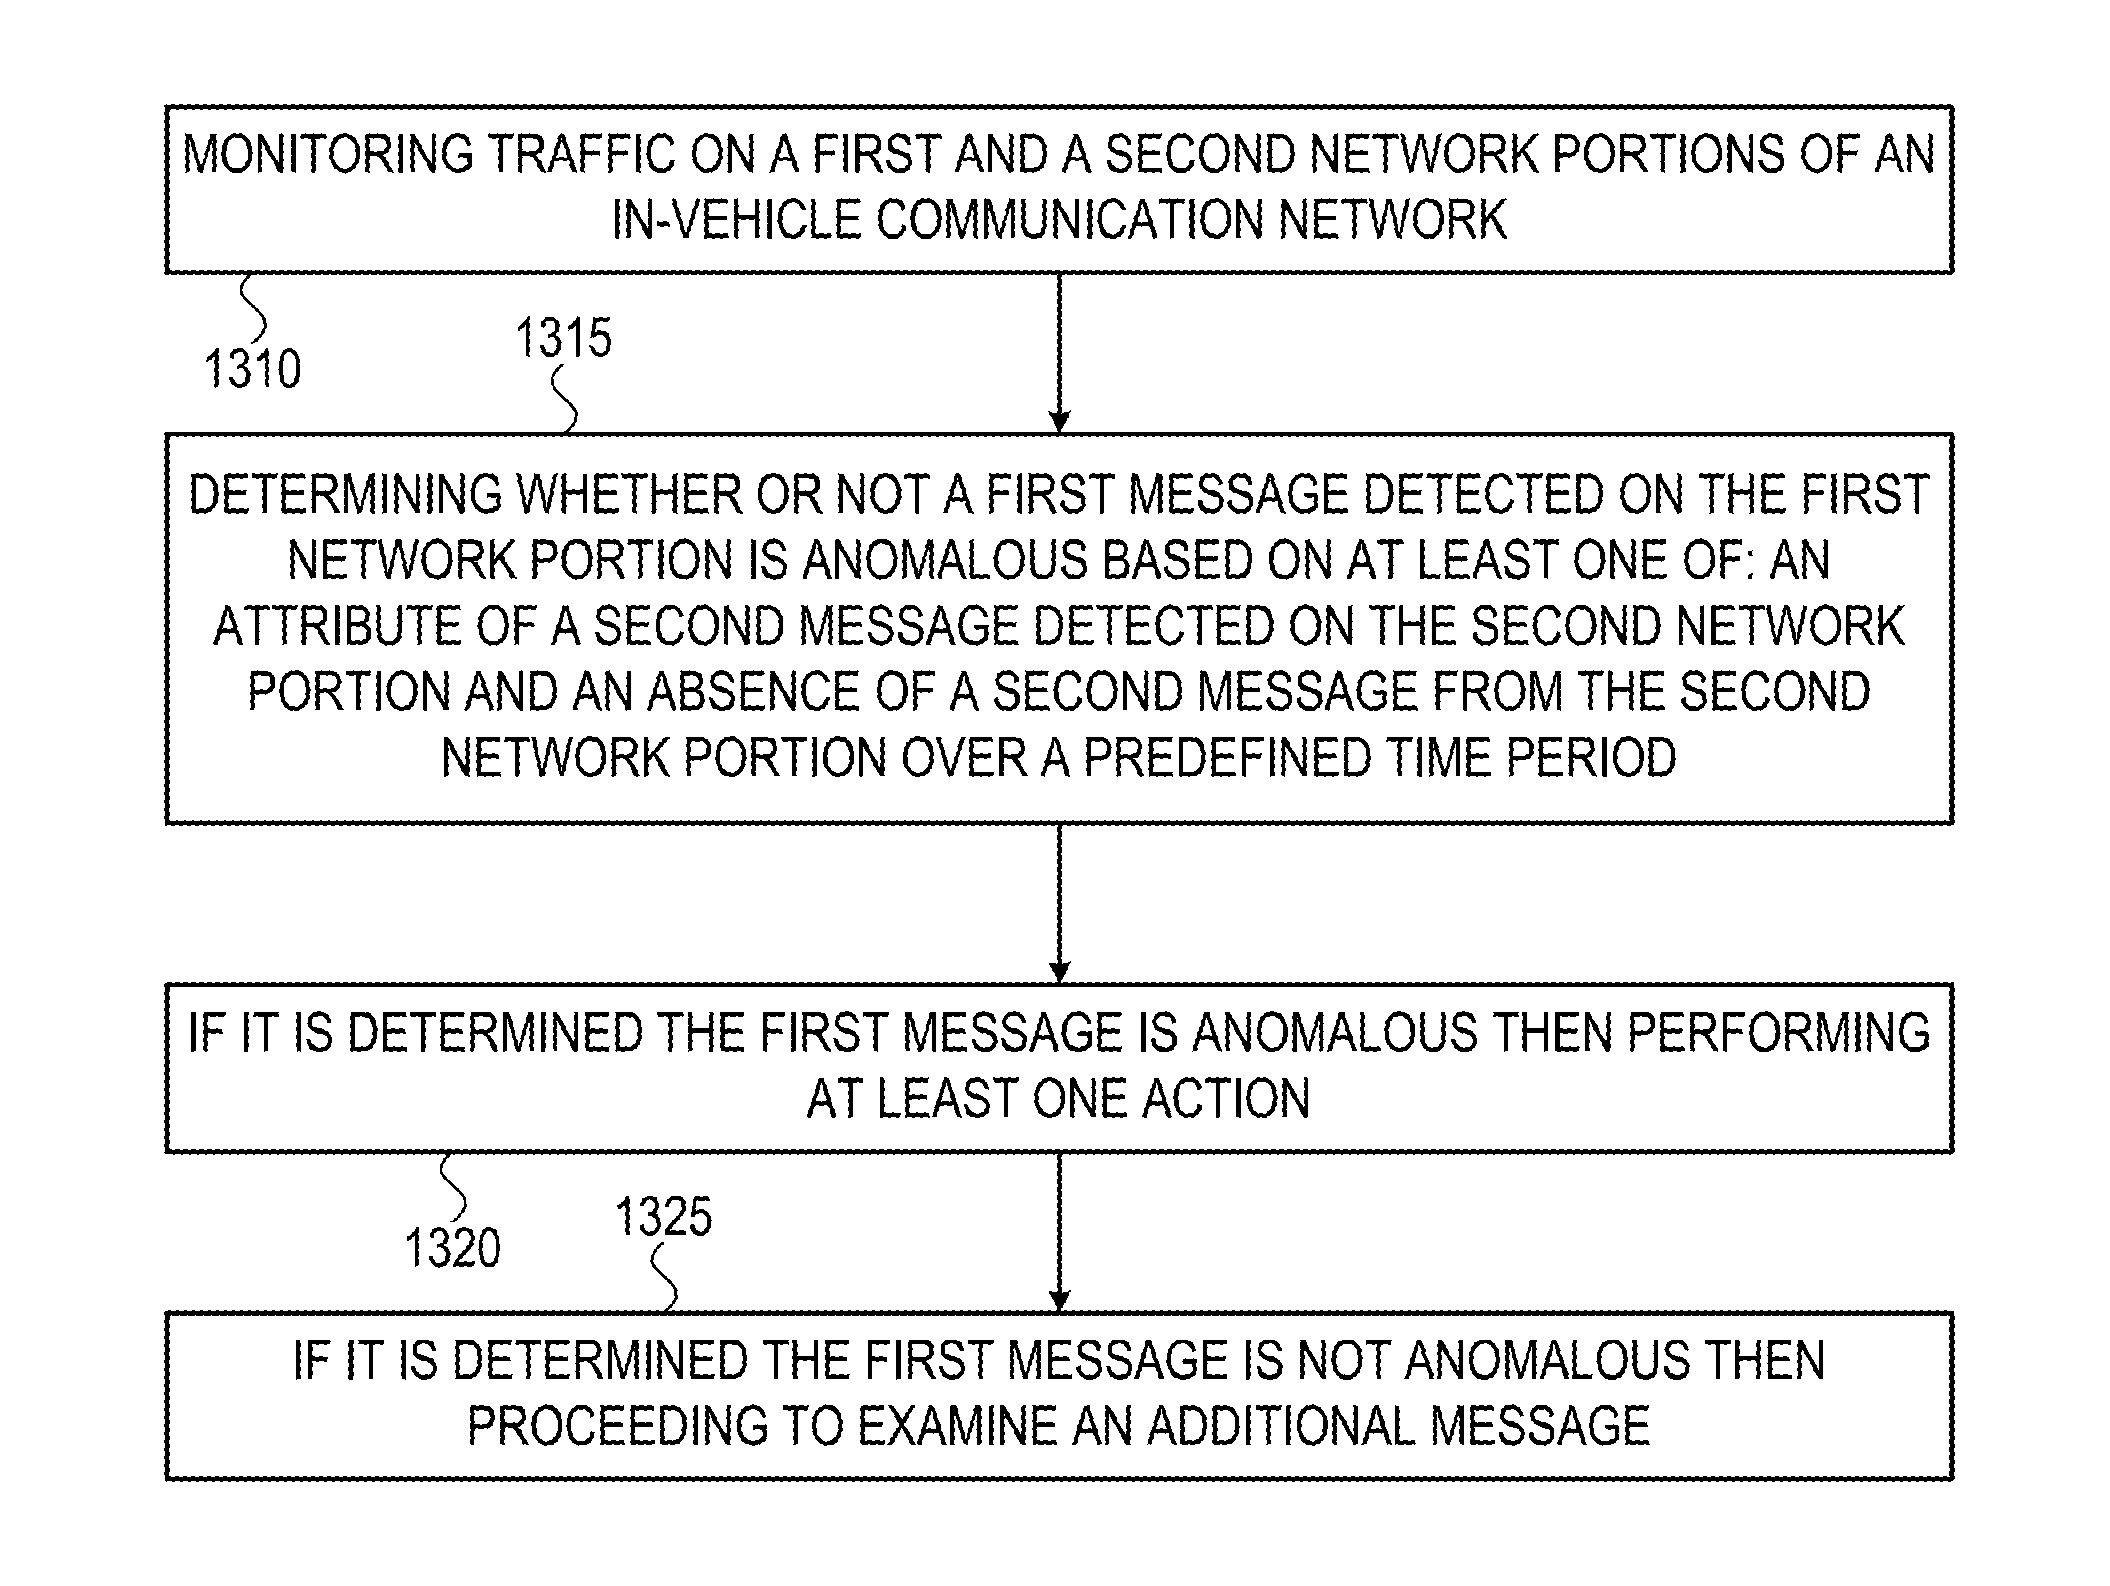 System and method for consistency based anomaly detection in an in-vehicle communication network